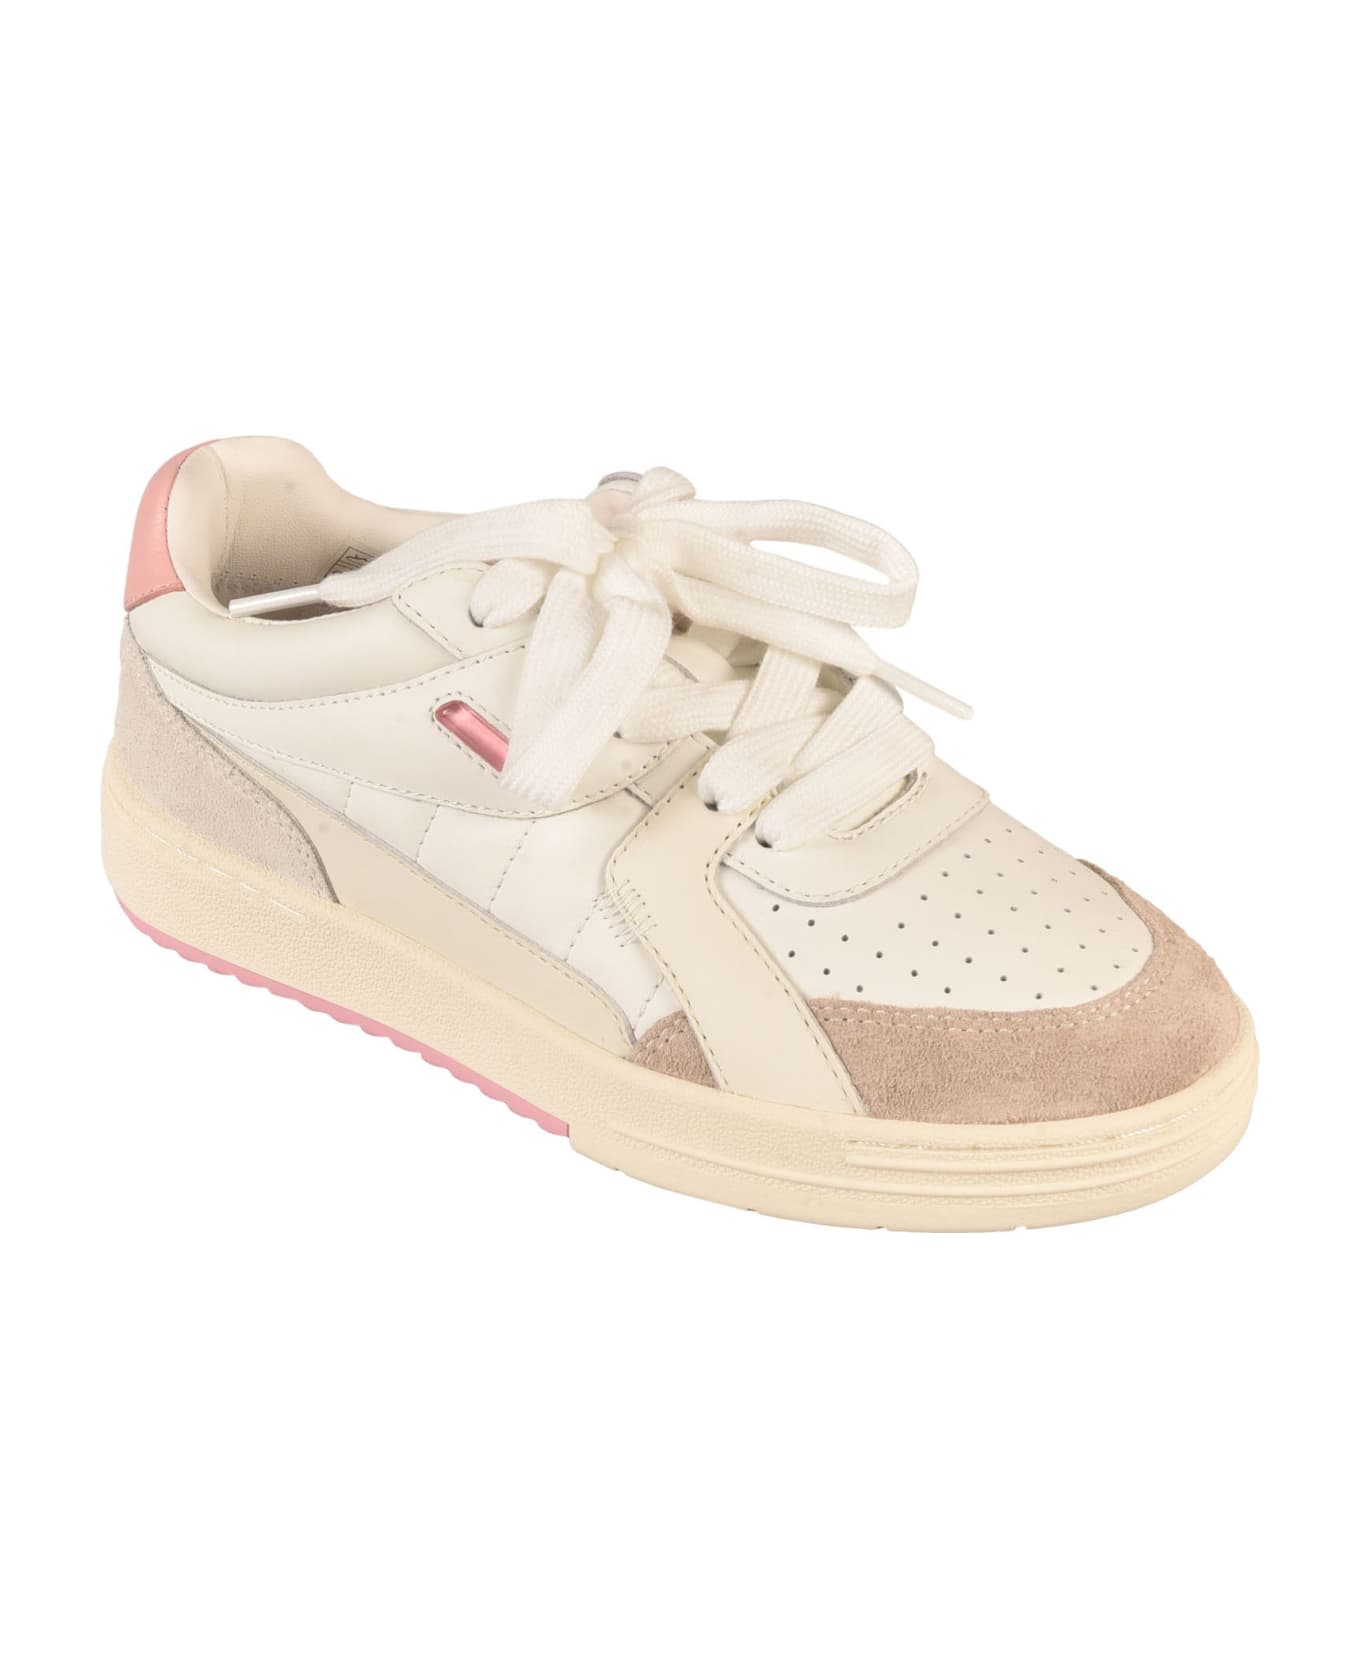 Palm Angels Multicolor Leather Palm University Sneakers - White/Pink